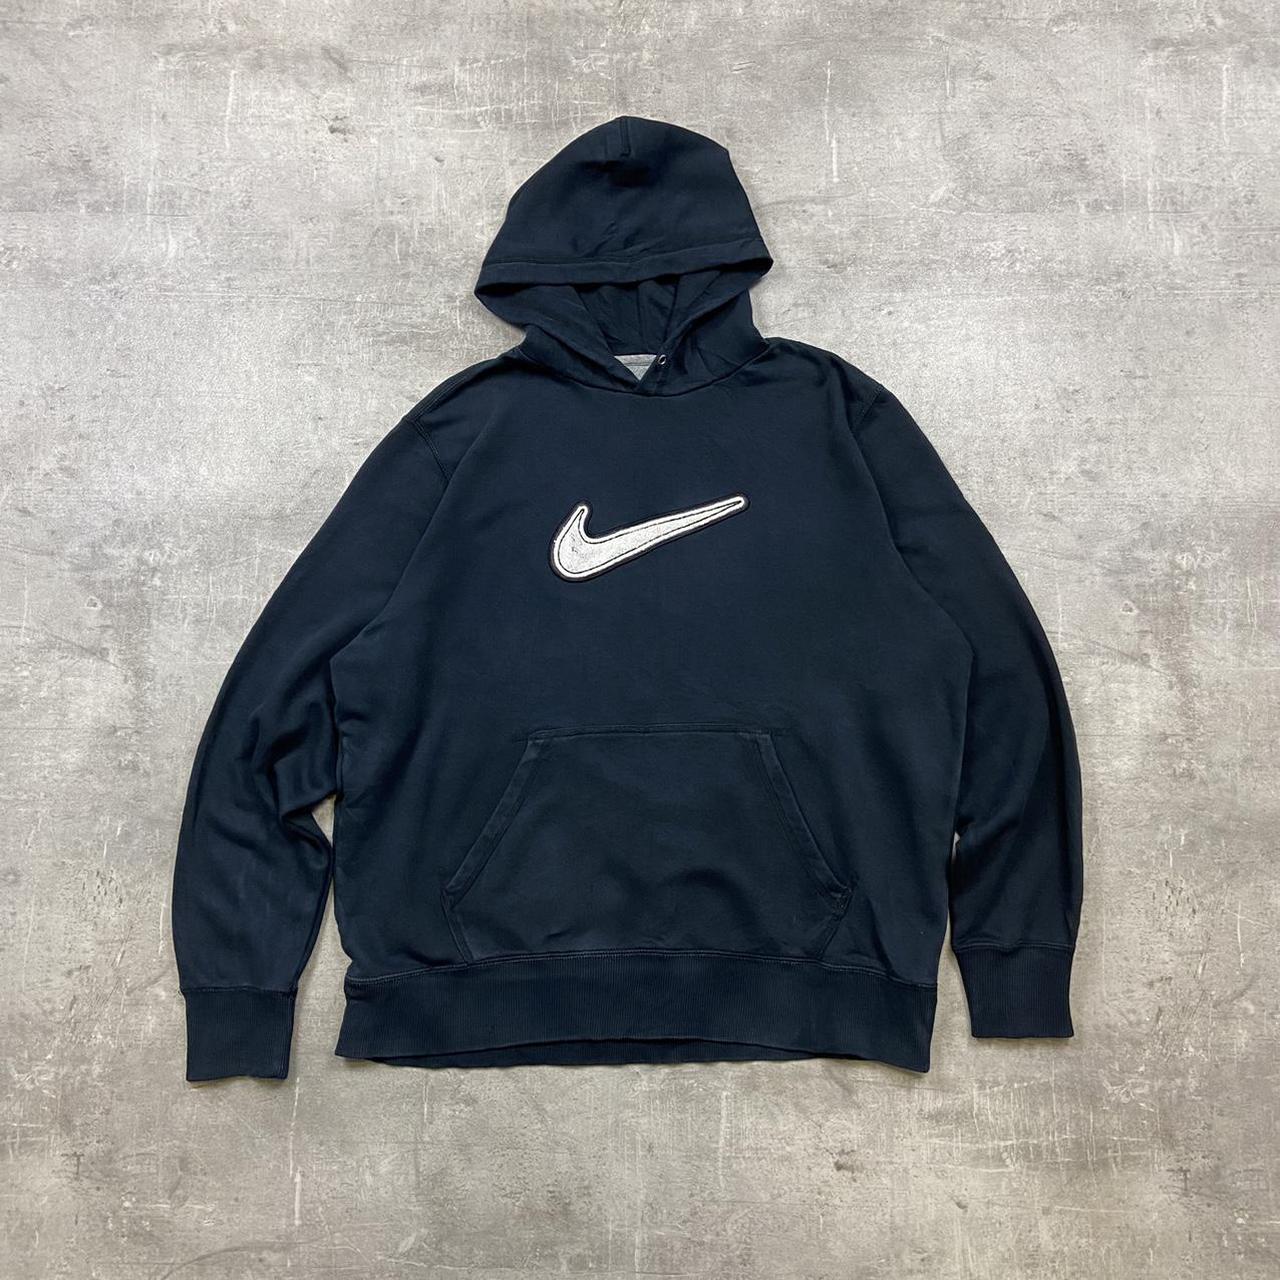 Vintage 00’s Nike spellout embroidered hoodie in... - Depop